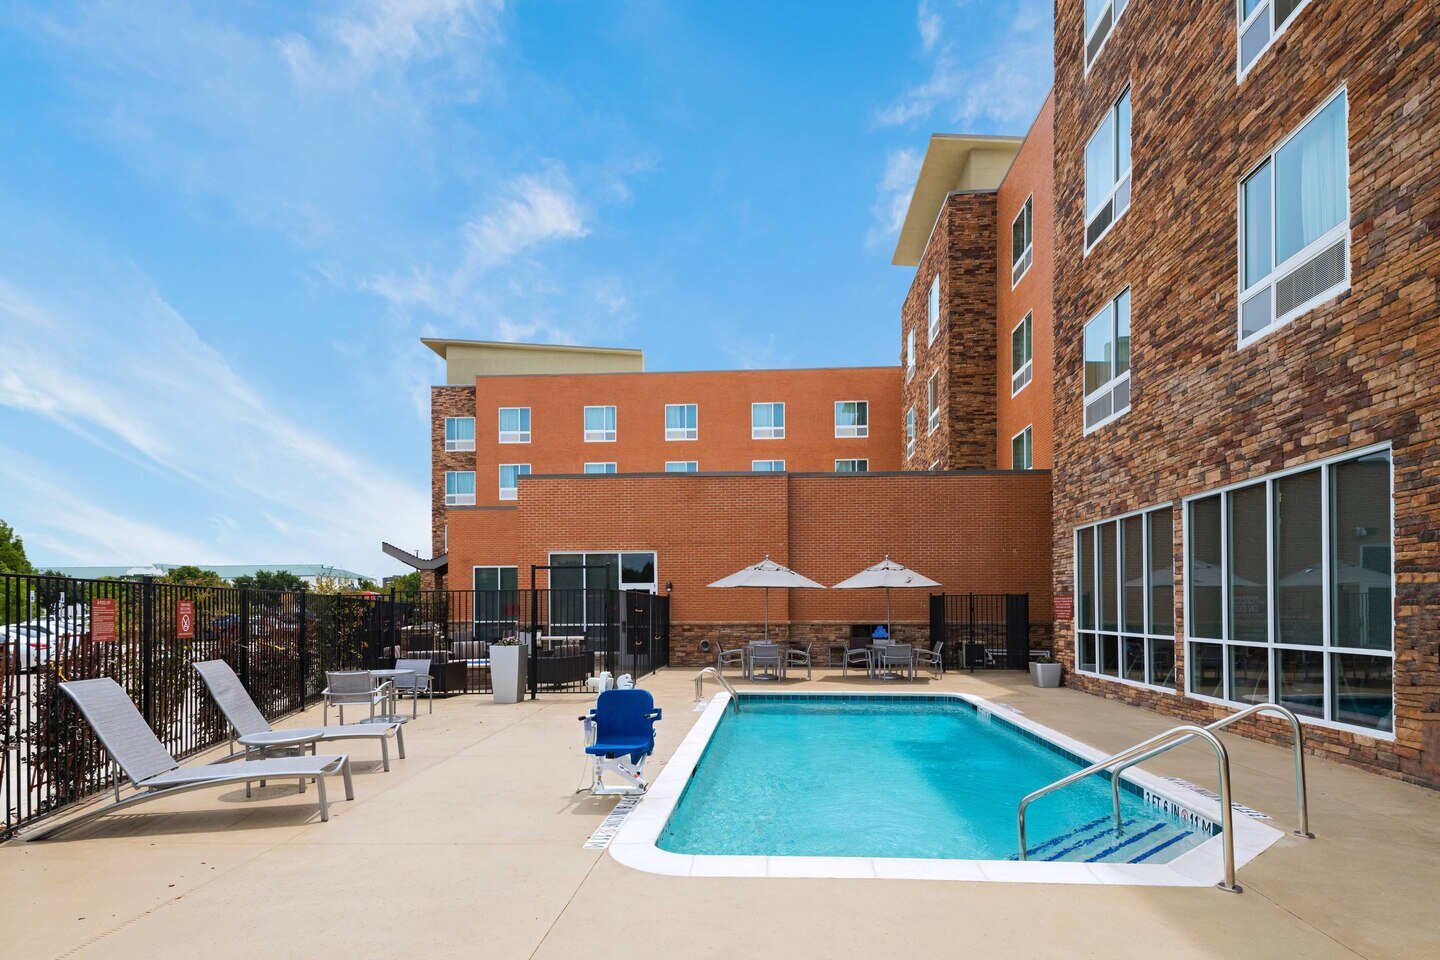 TownePlace Suites_Irving, TX_Campo Architects (14).jpg